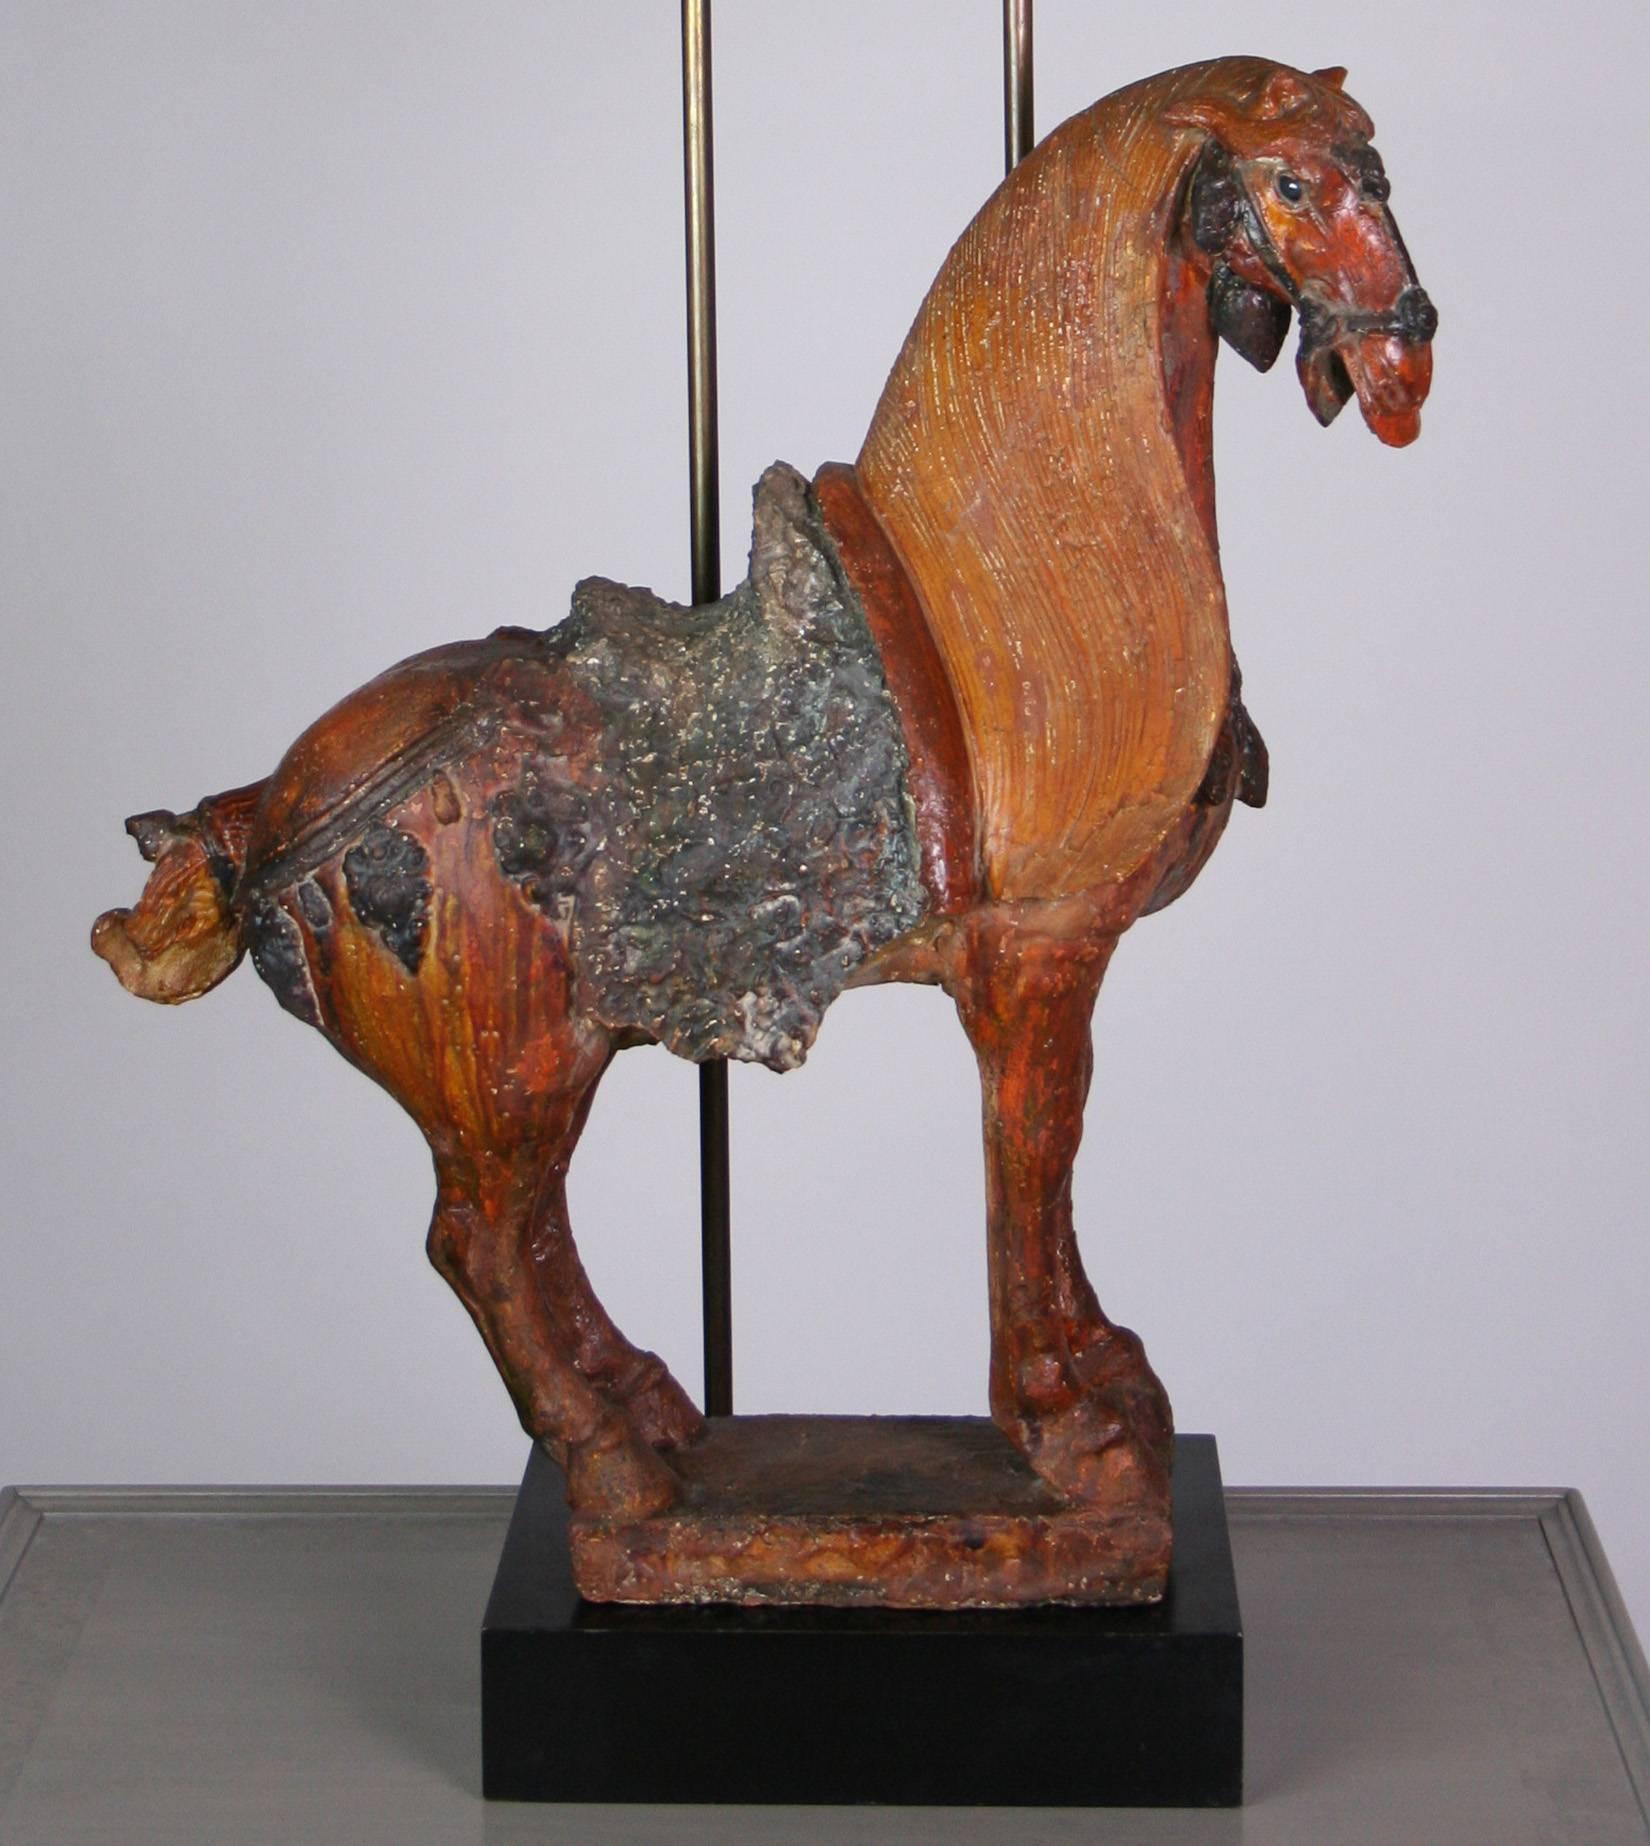 A good Mid-Century Modern painted plaster Tang dynasty style horse, on a black plinth with brass rods supporting a custom box shade. Very Hollywood Regency and Billy Haines style. The horse sculpture is 24